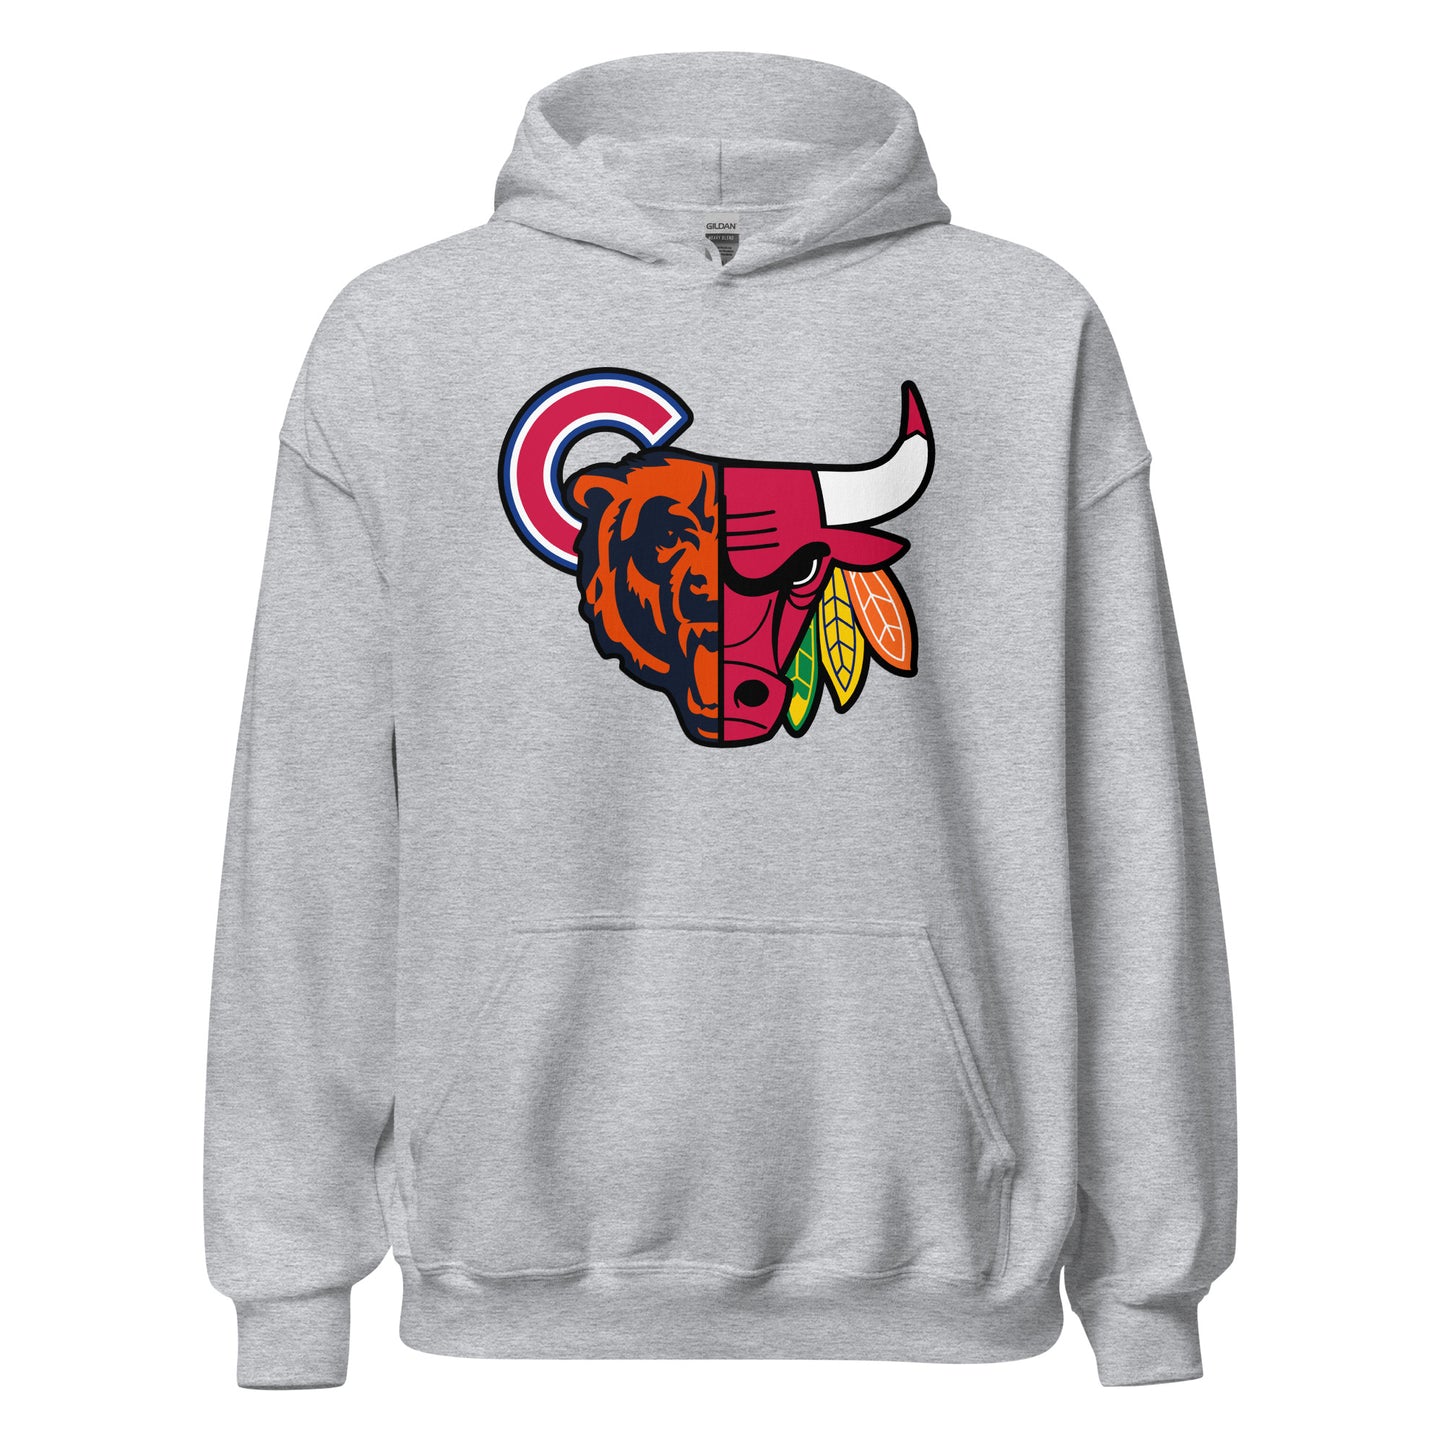 CHI (Cubs) Hoodie - Full Color